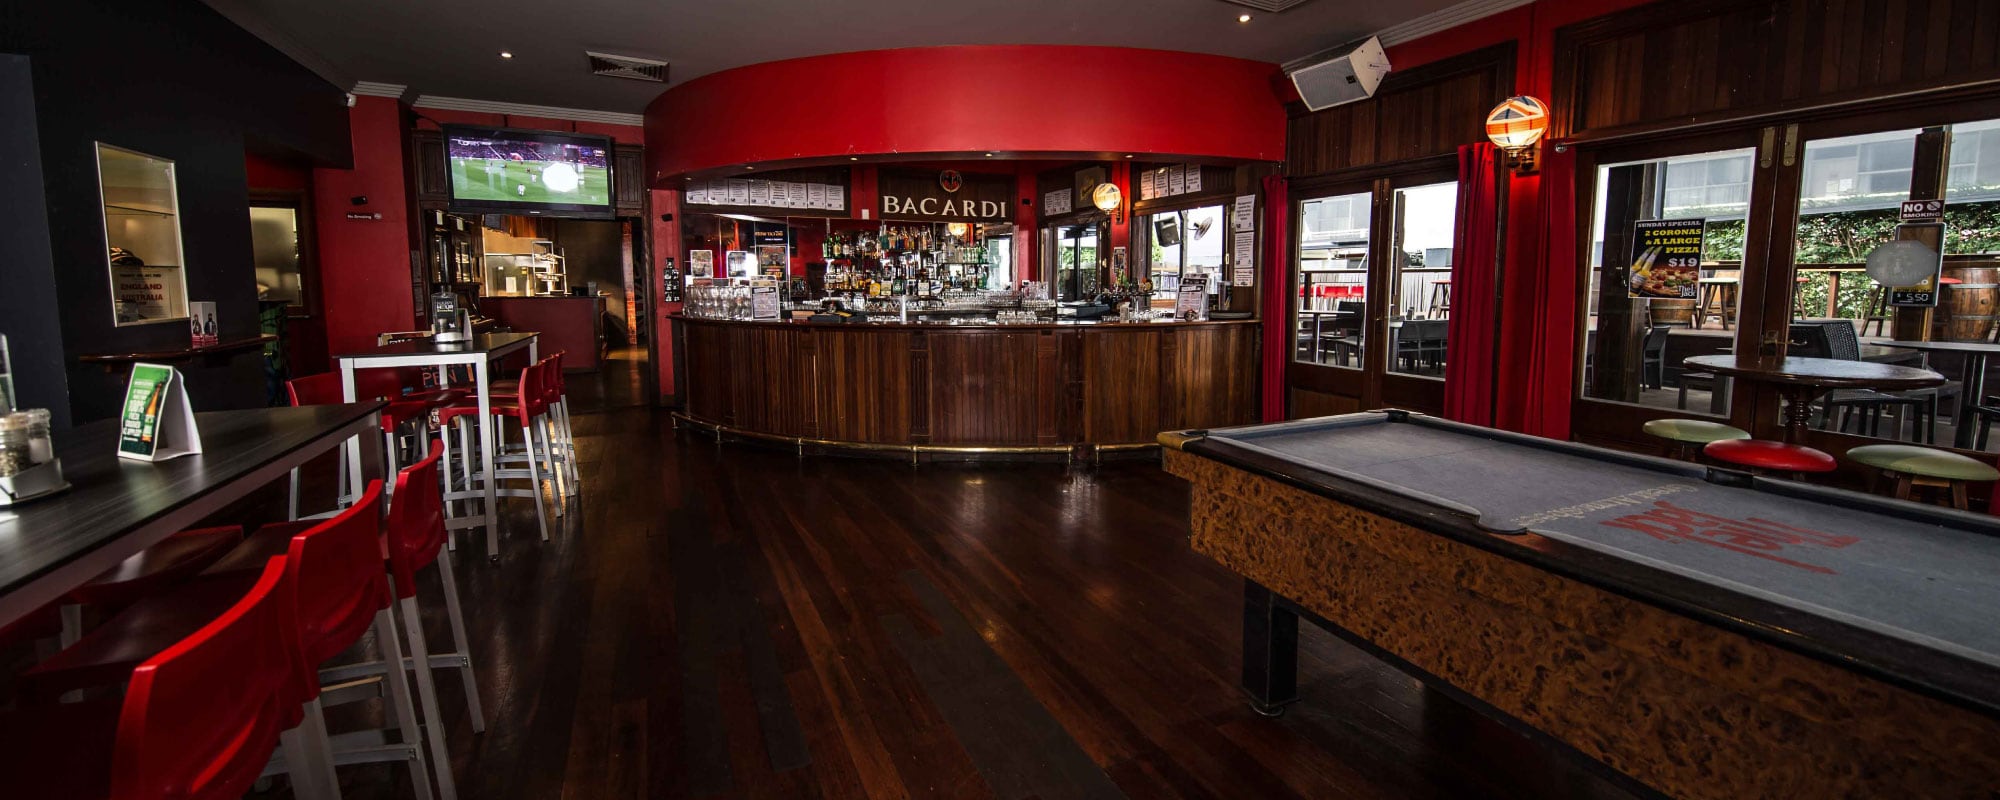 The-jack-cairns-bar-pub-hostel-backpackers